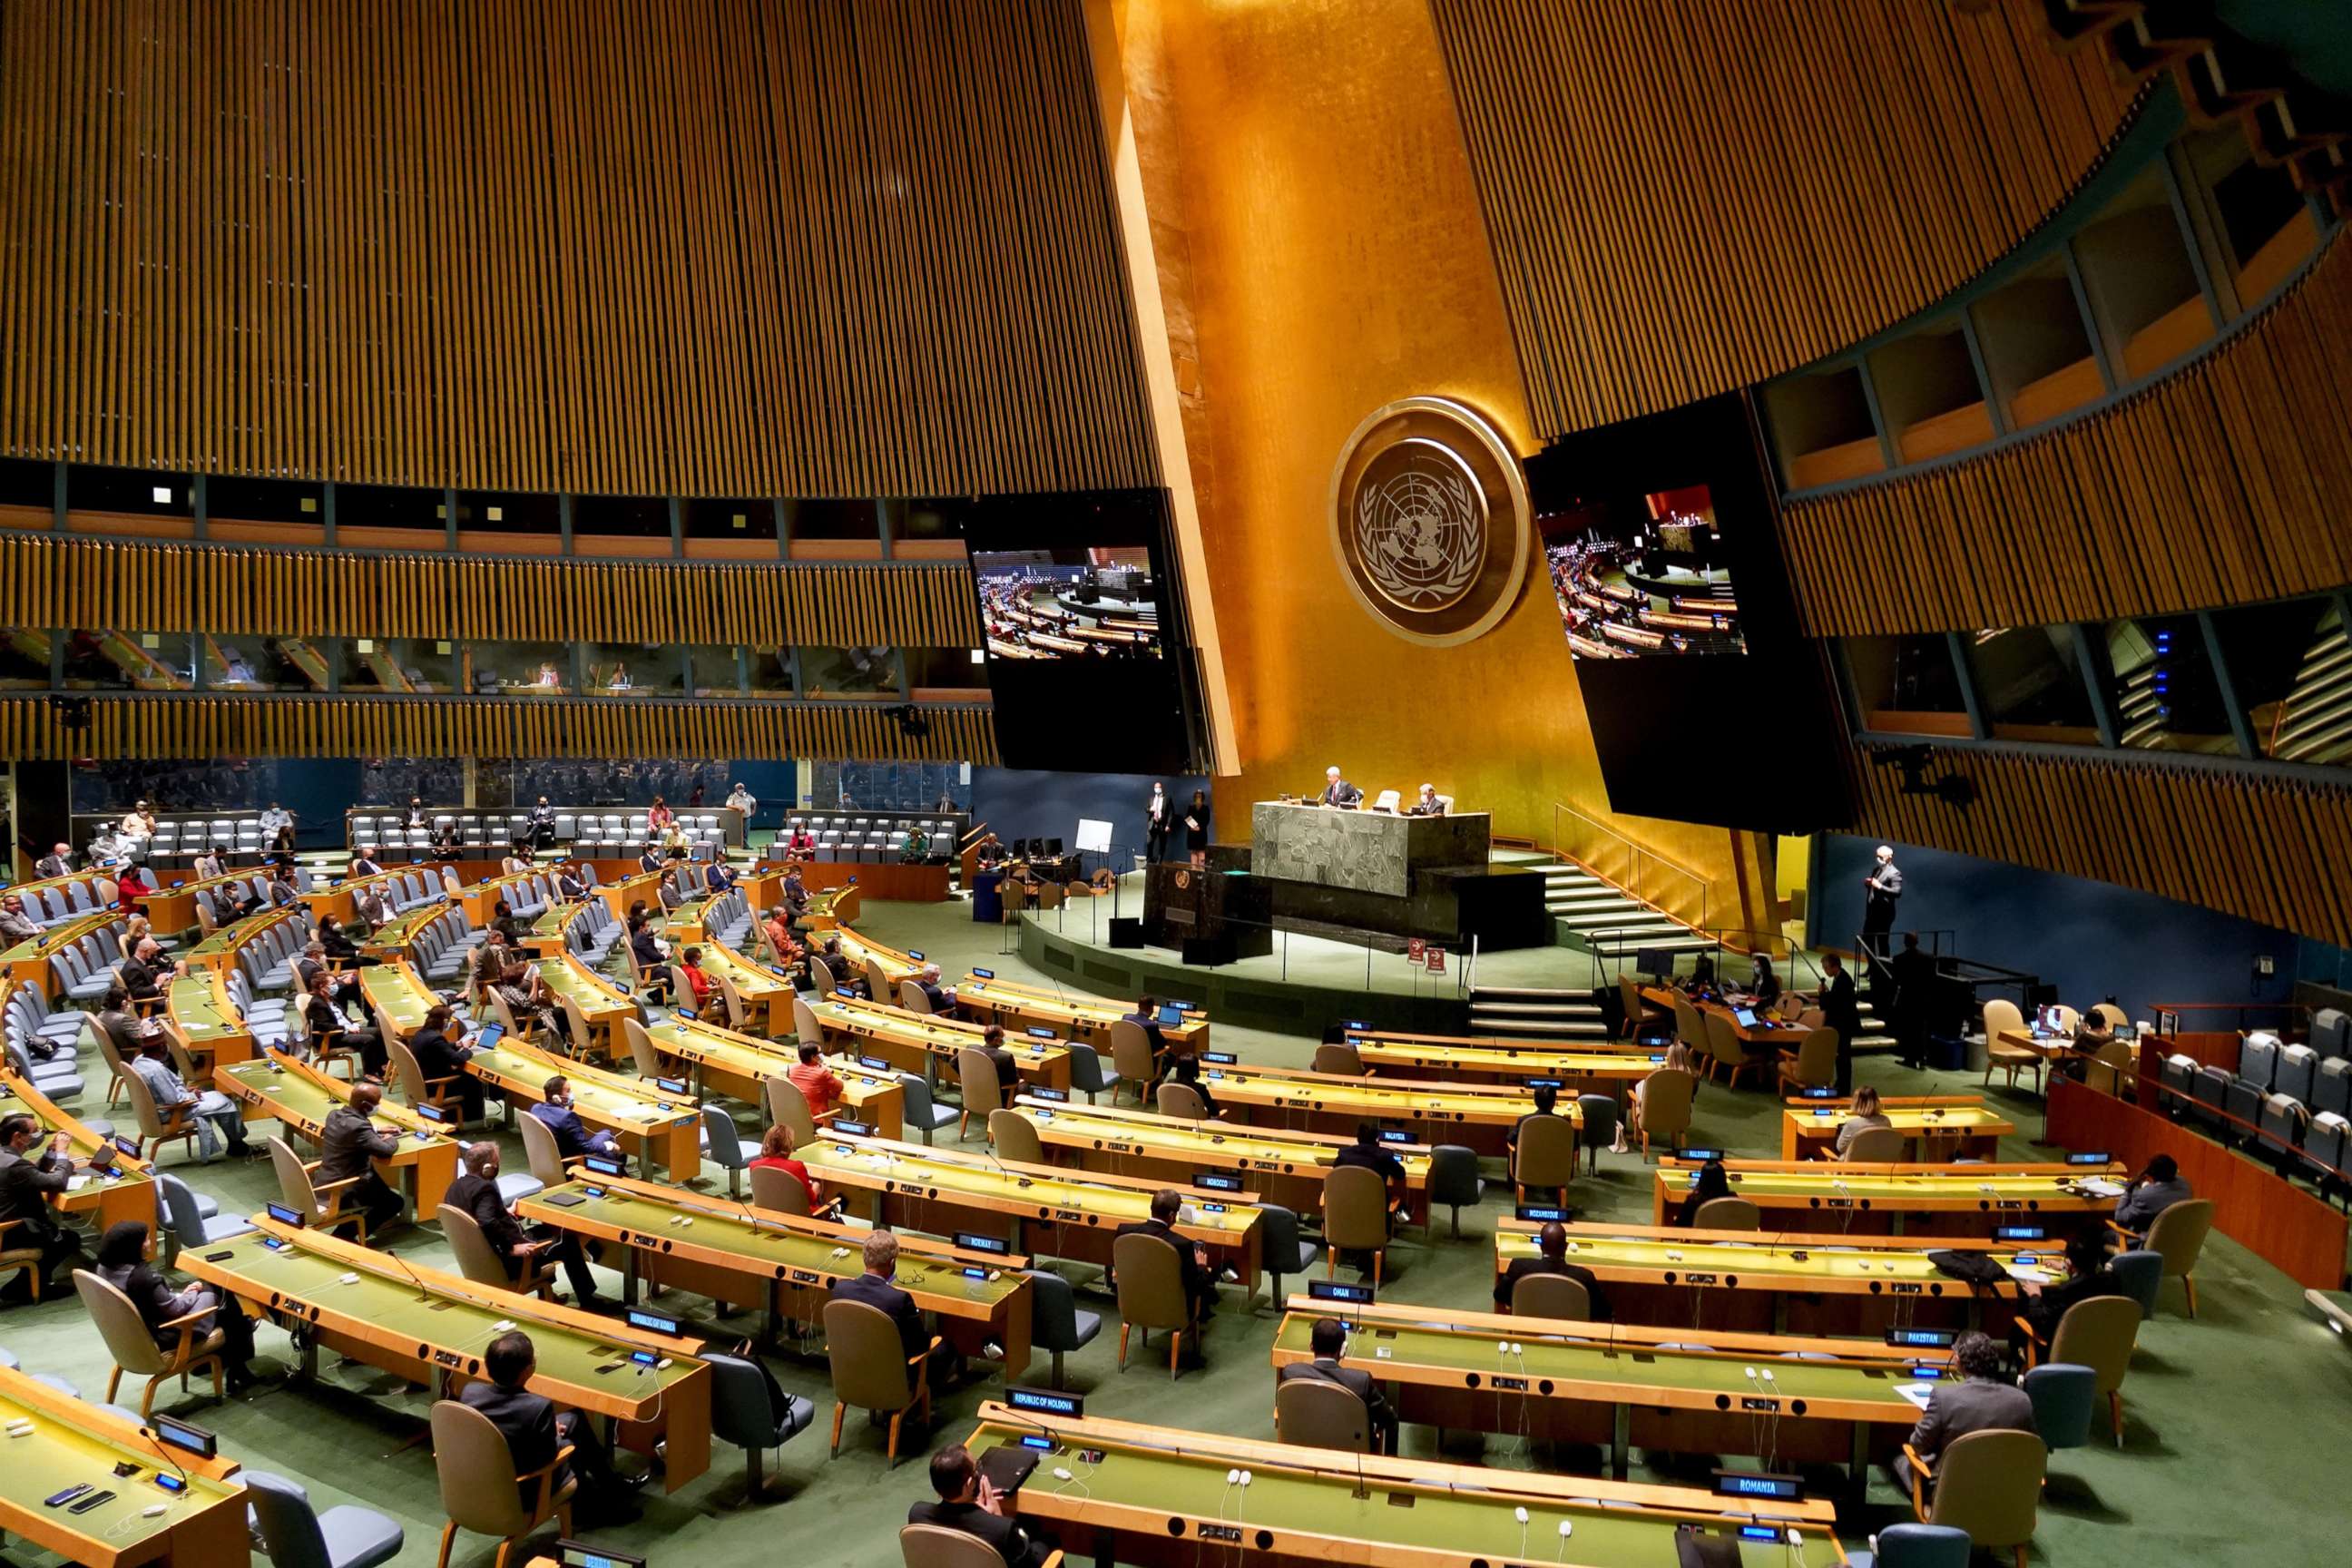 PHOTO: The 75th session of the UN General Assembly has a small number of attendees due to the COVID-19 pandemic in the famous UNGA hall at New York Headquarters, Sept. 15, 2020.